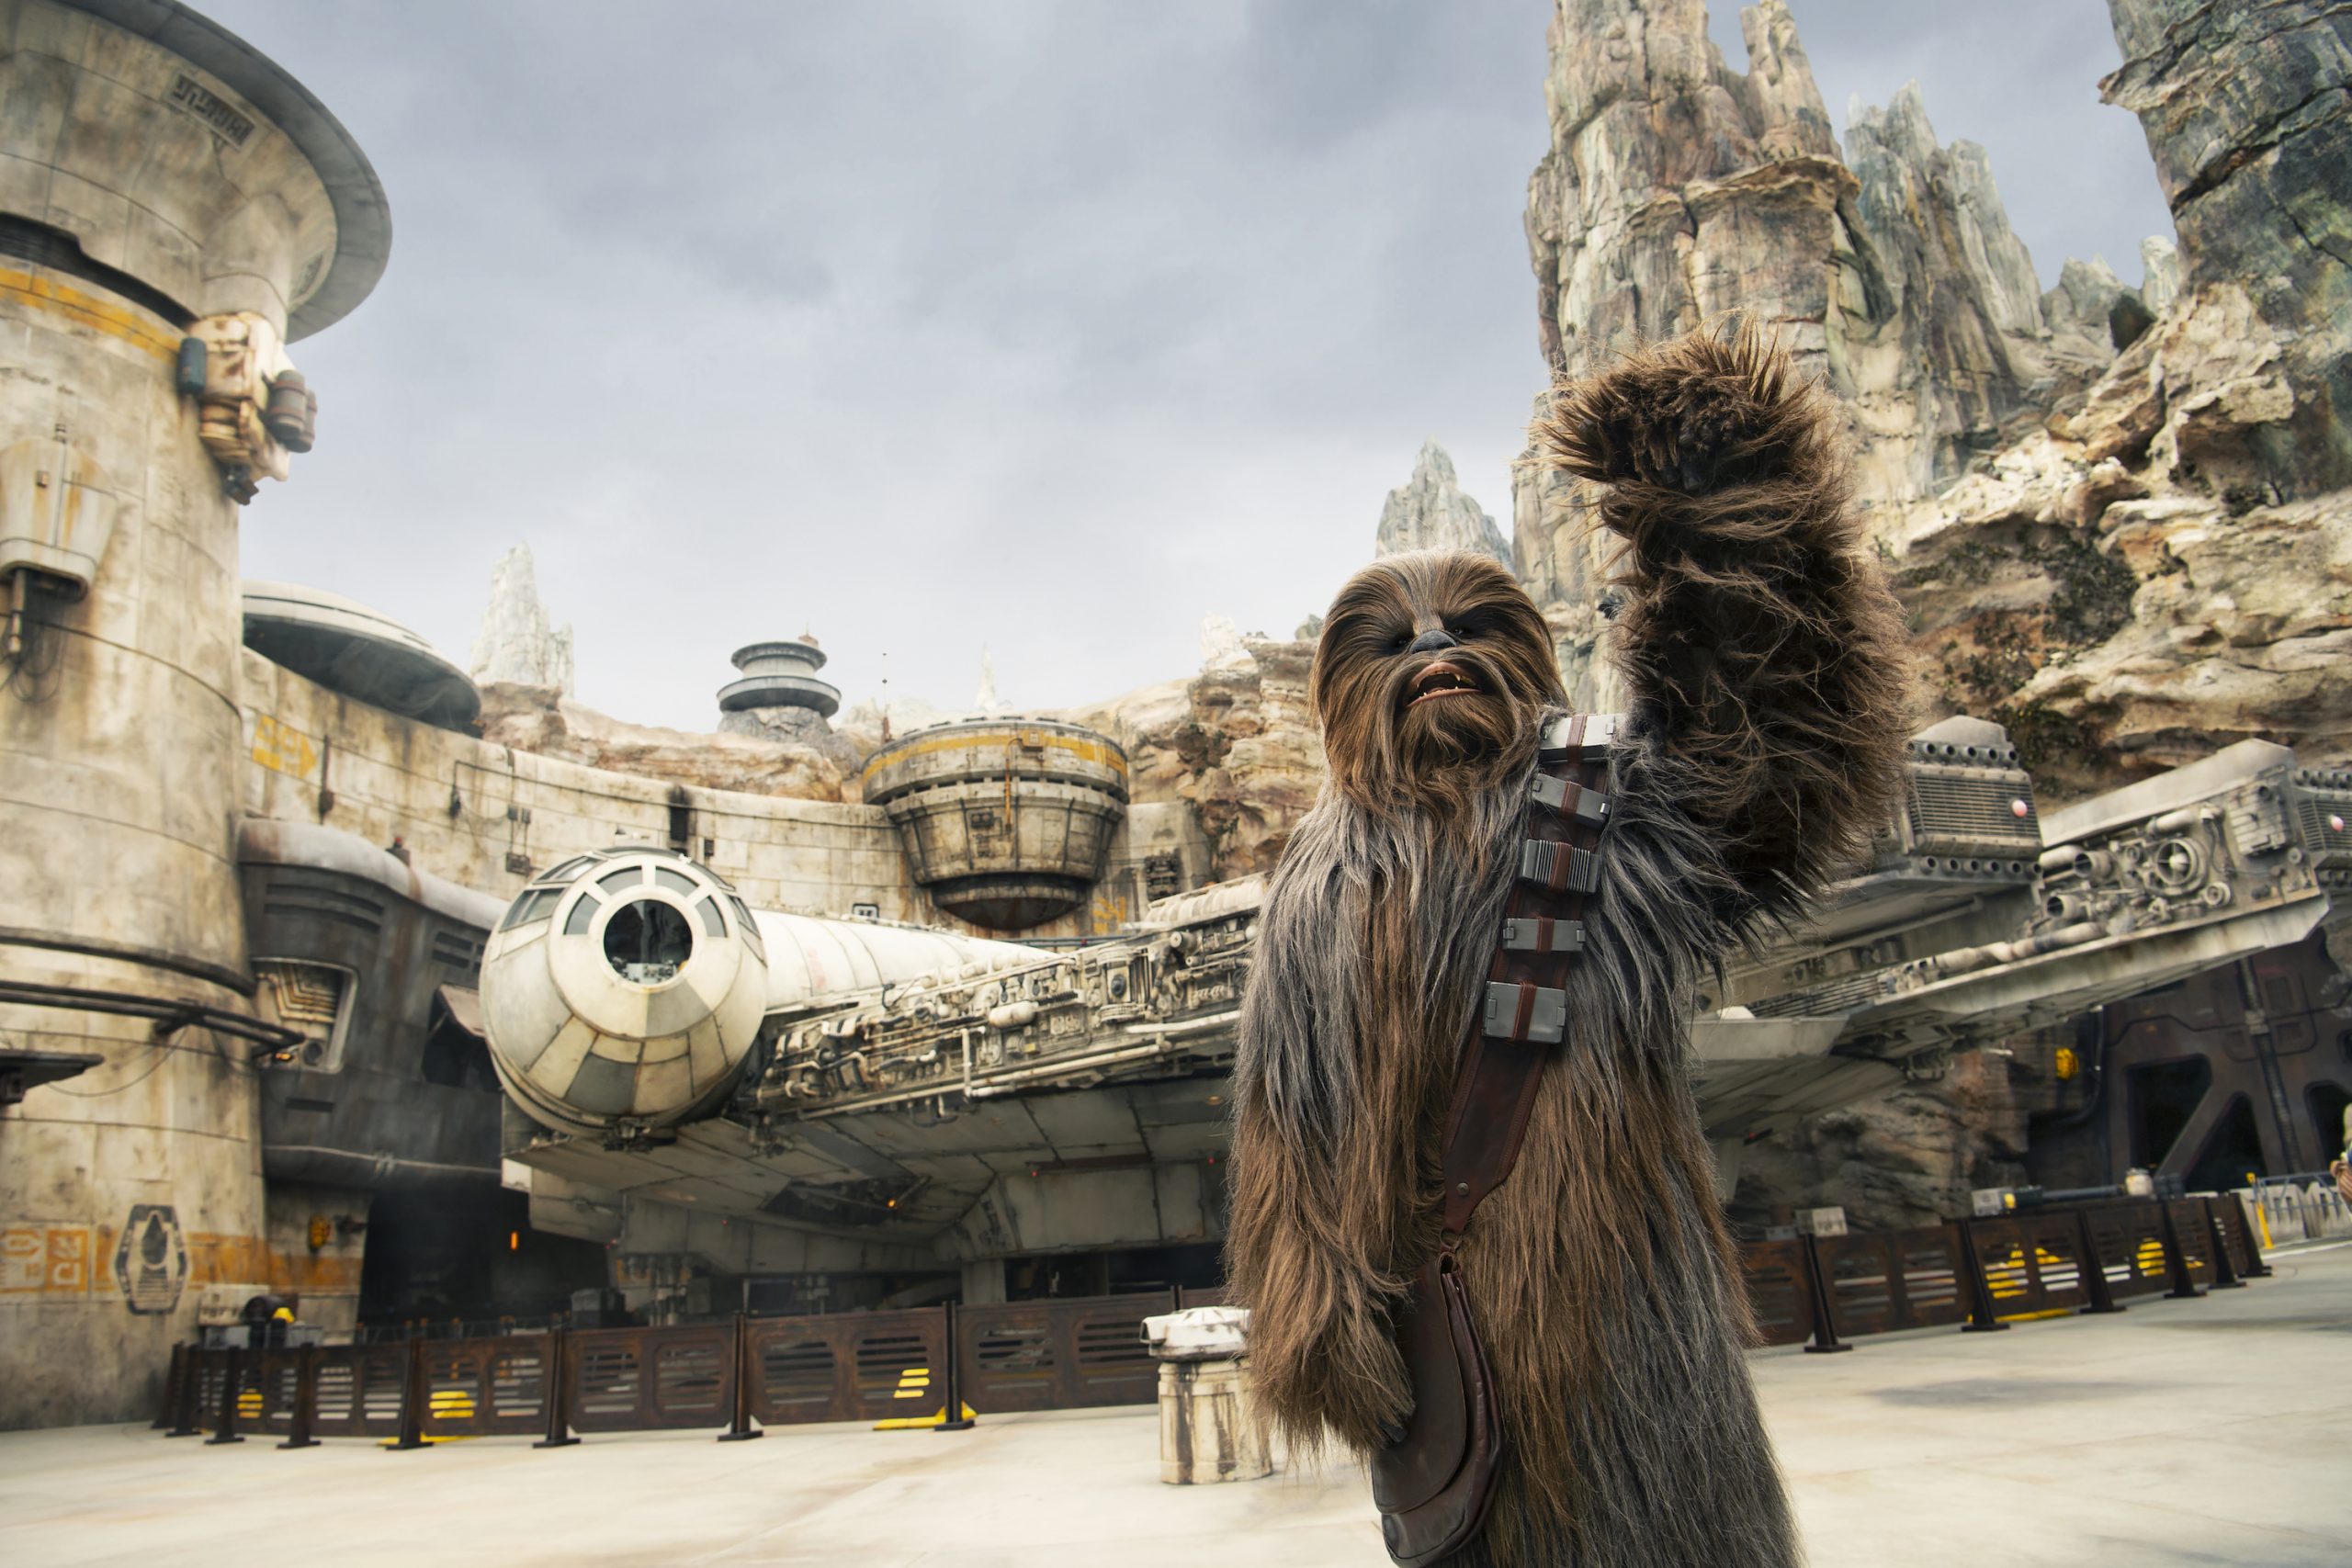 Behind the Attraction, Star Wars: Galaxy's Edge